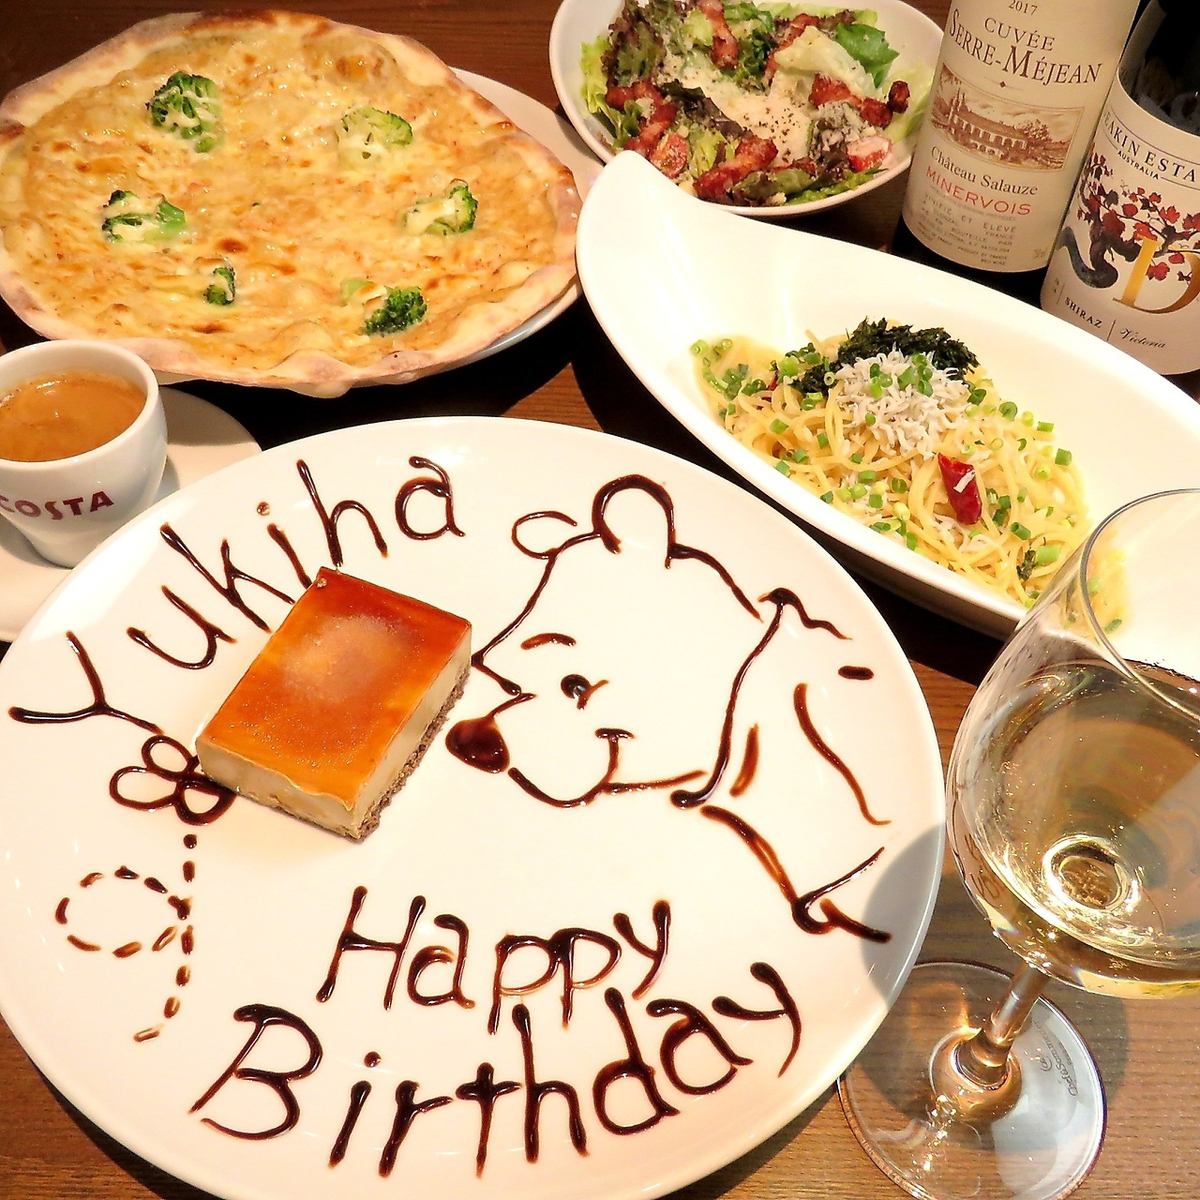 There is no doubt that the main character will be impressed with the stylish space and the surprise plate presentation ♪